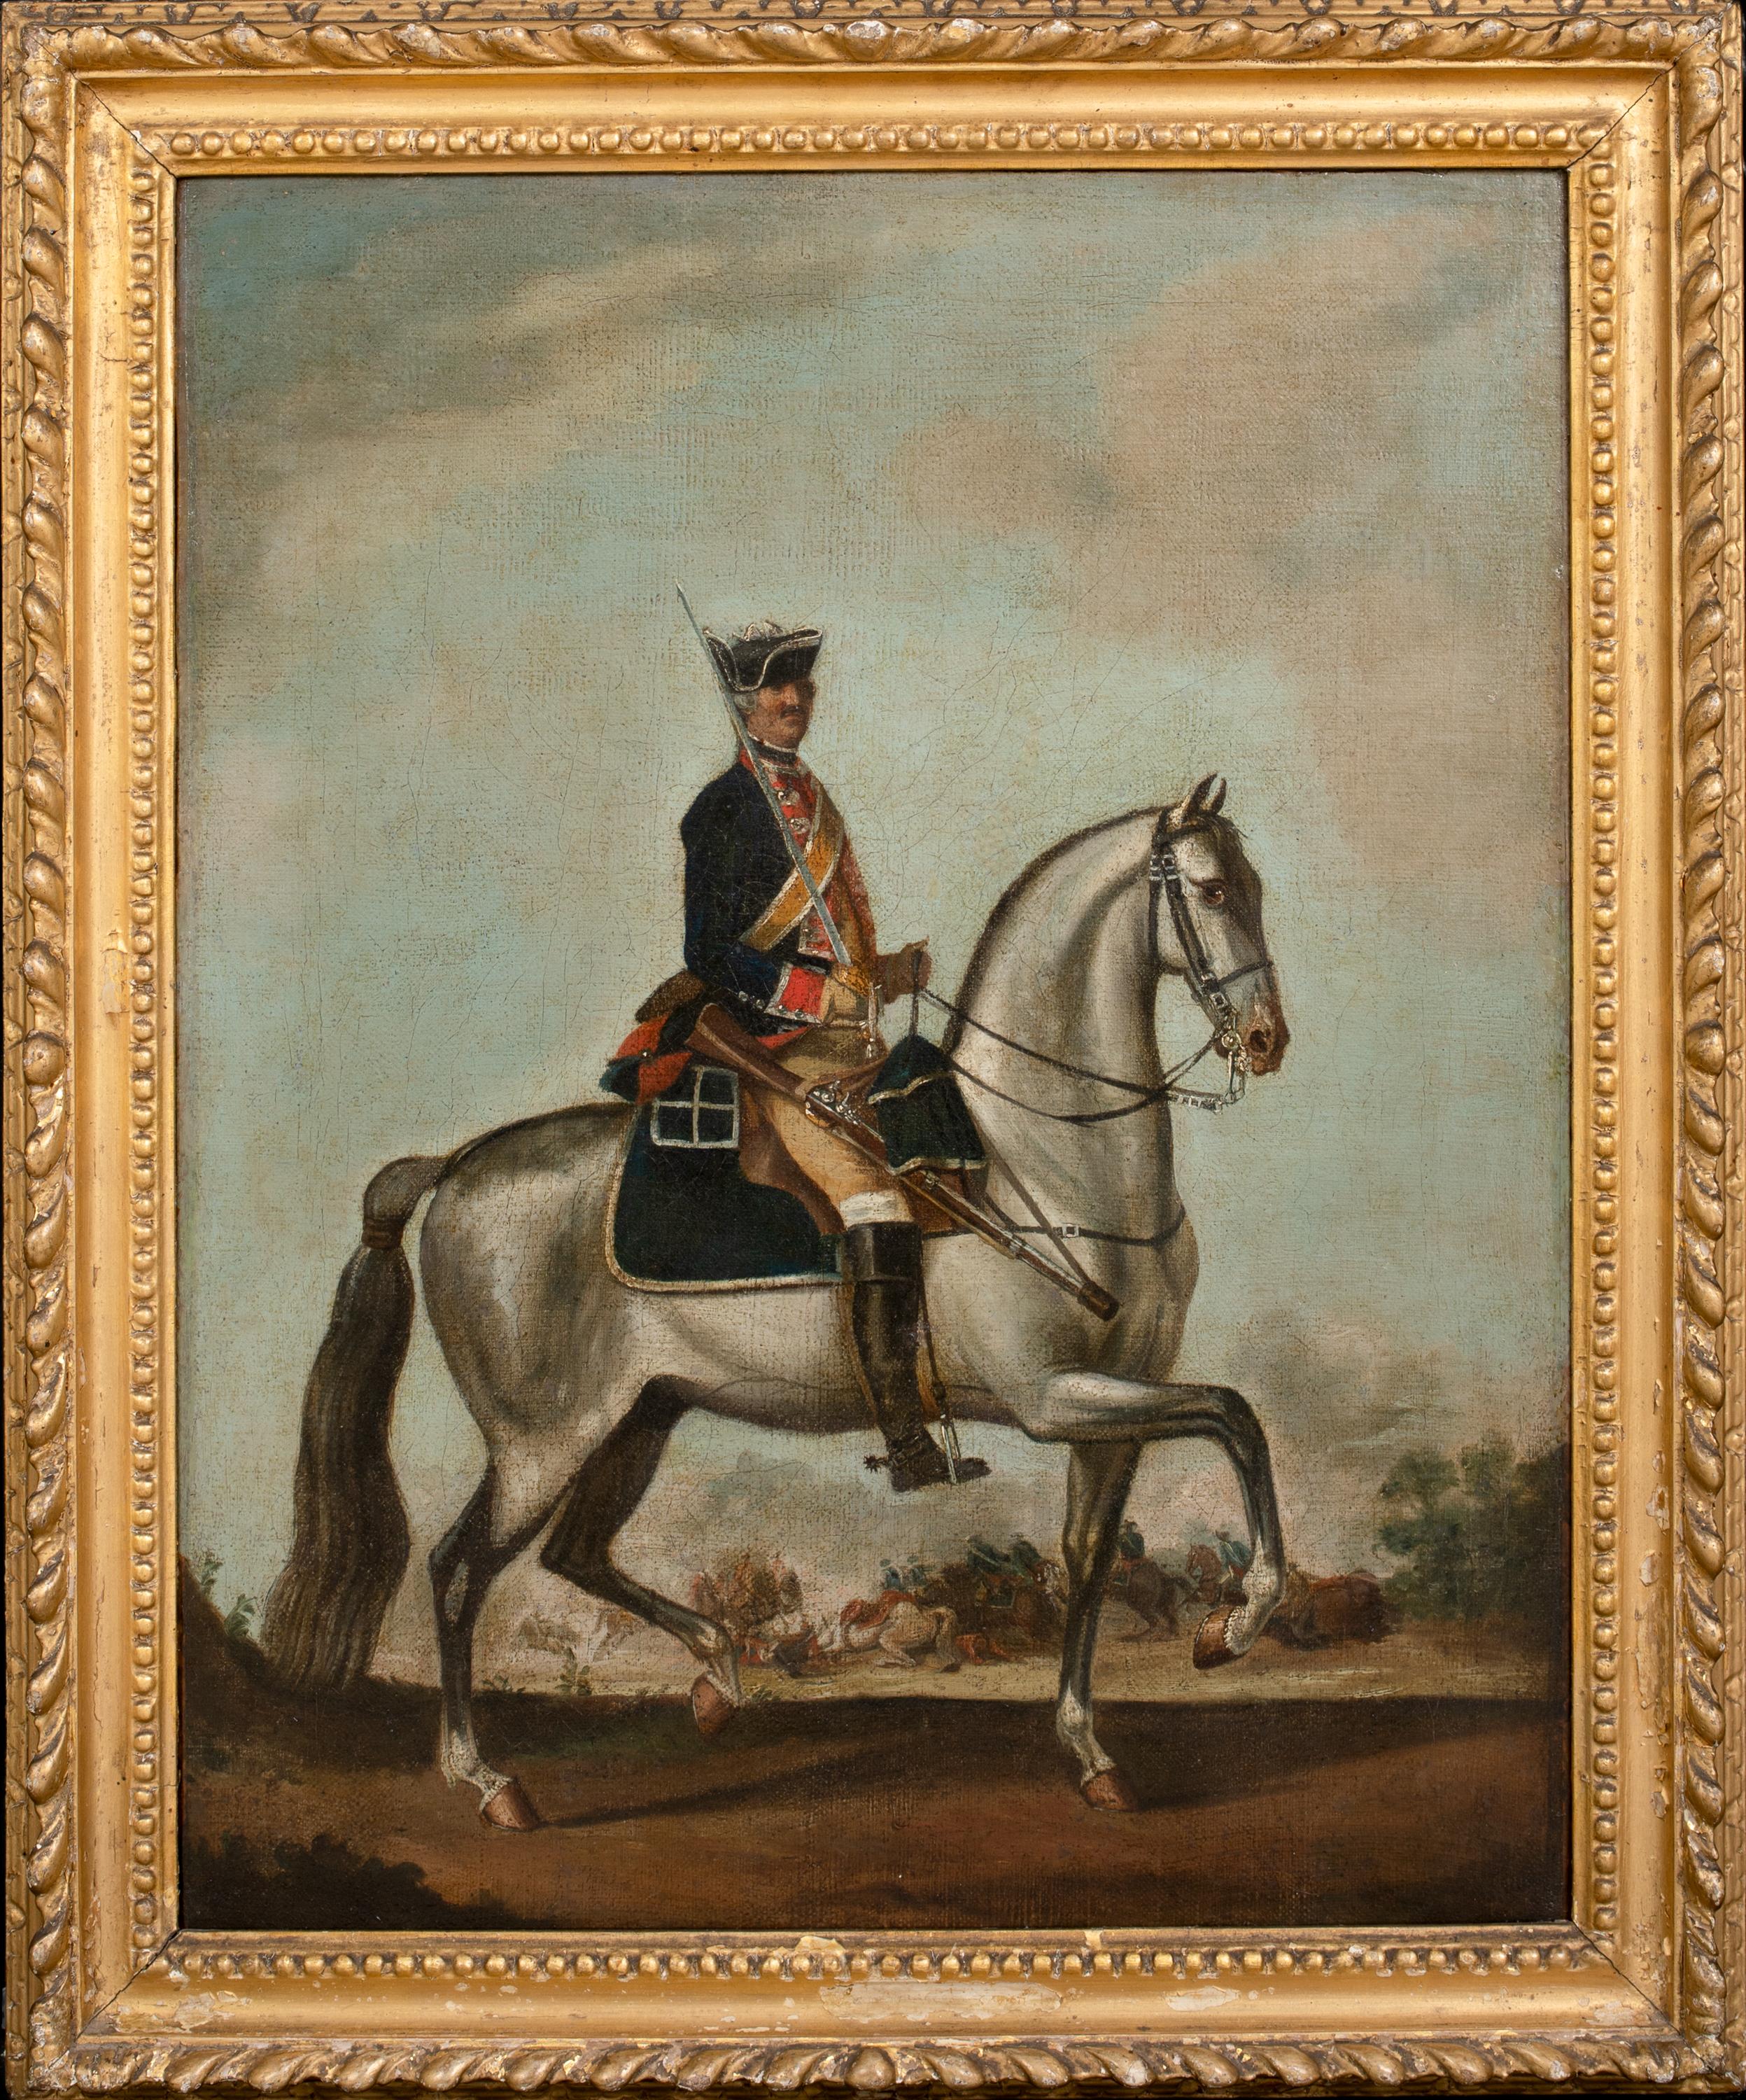 David Morier Portrait Painting - Officer & Horse Of The Royal Queens Dragoons, Seven Years War (1756-1763)